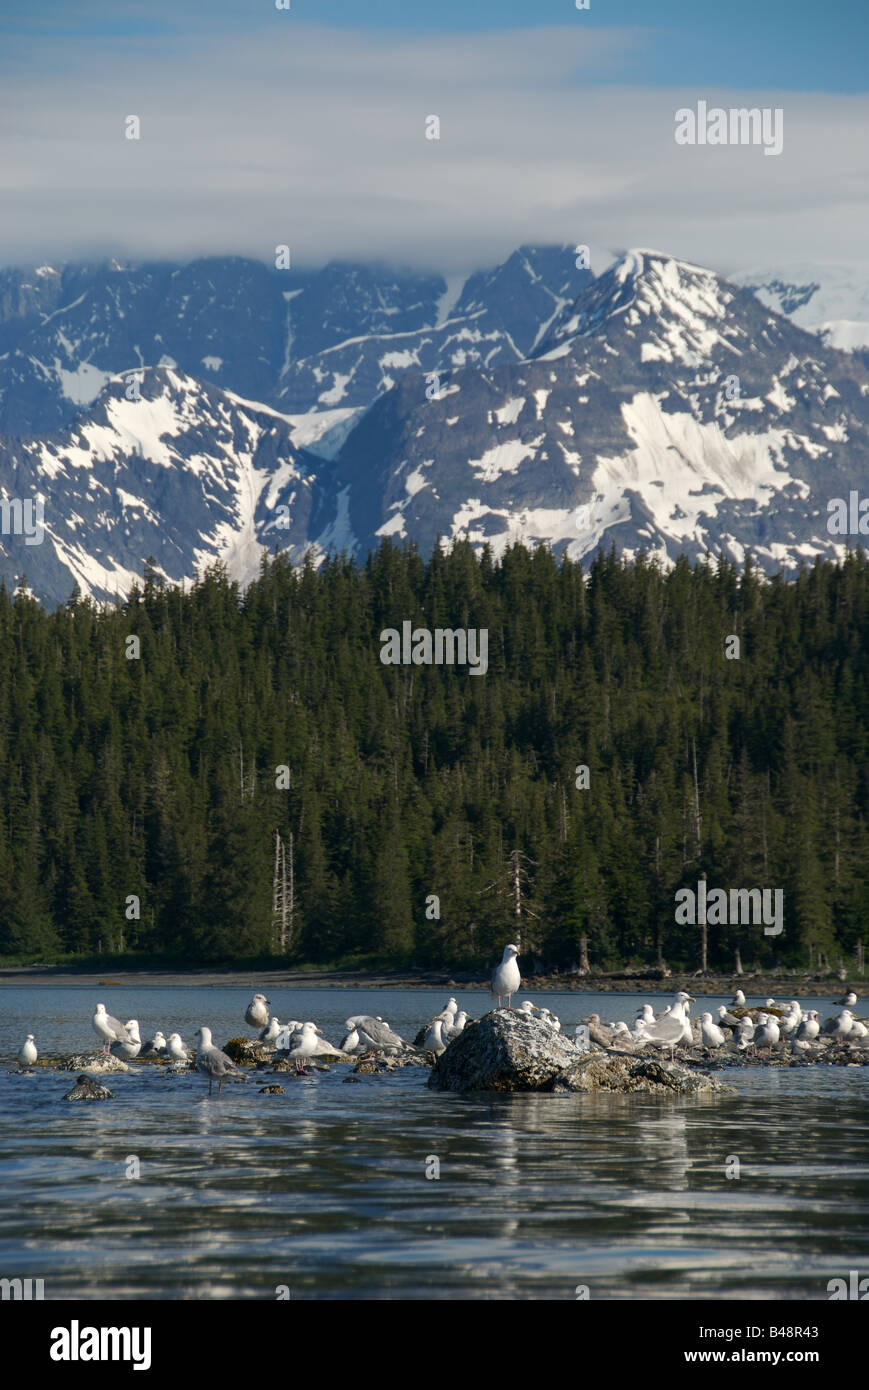 Seagulls rest on rocks along the coast of Prince William Sound alaska with mountains in the background Stock Photo